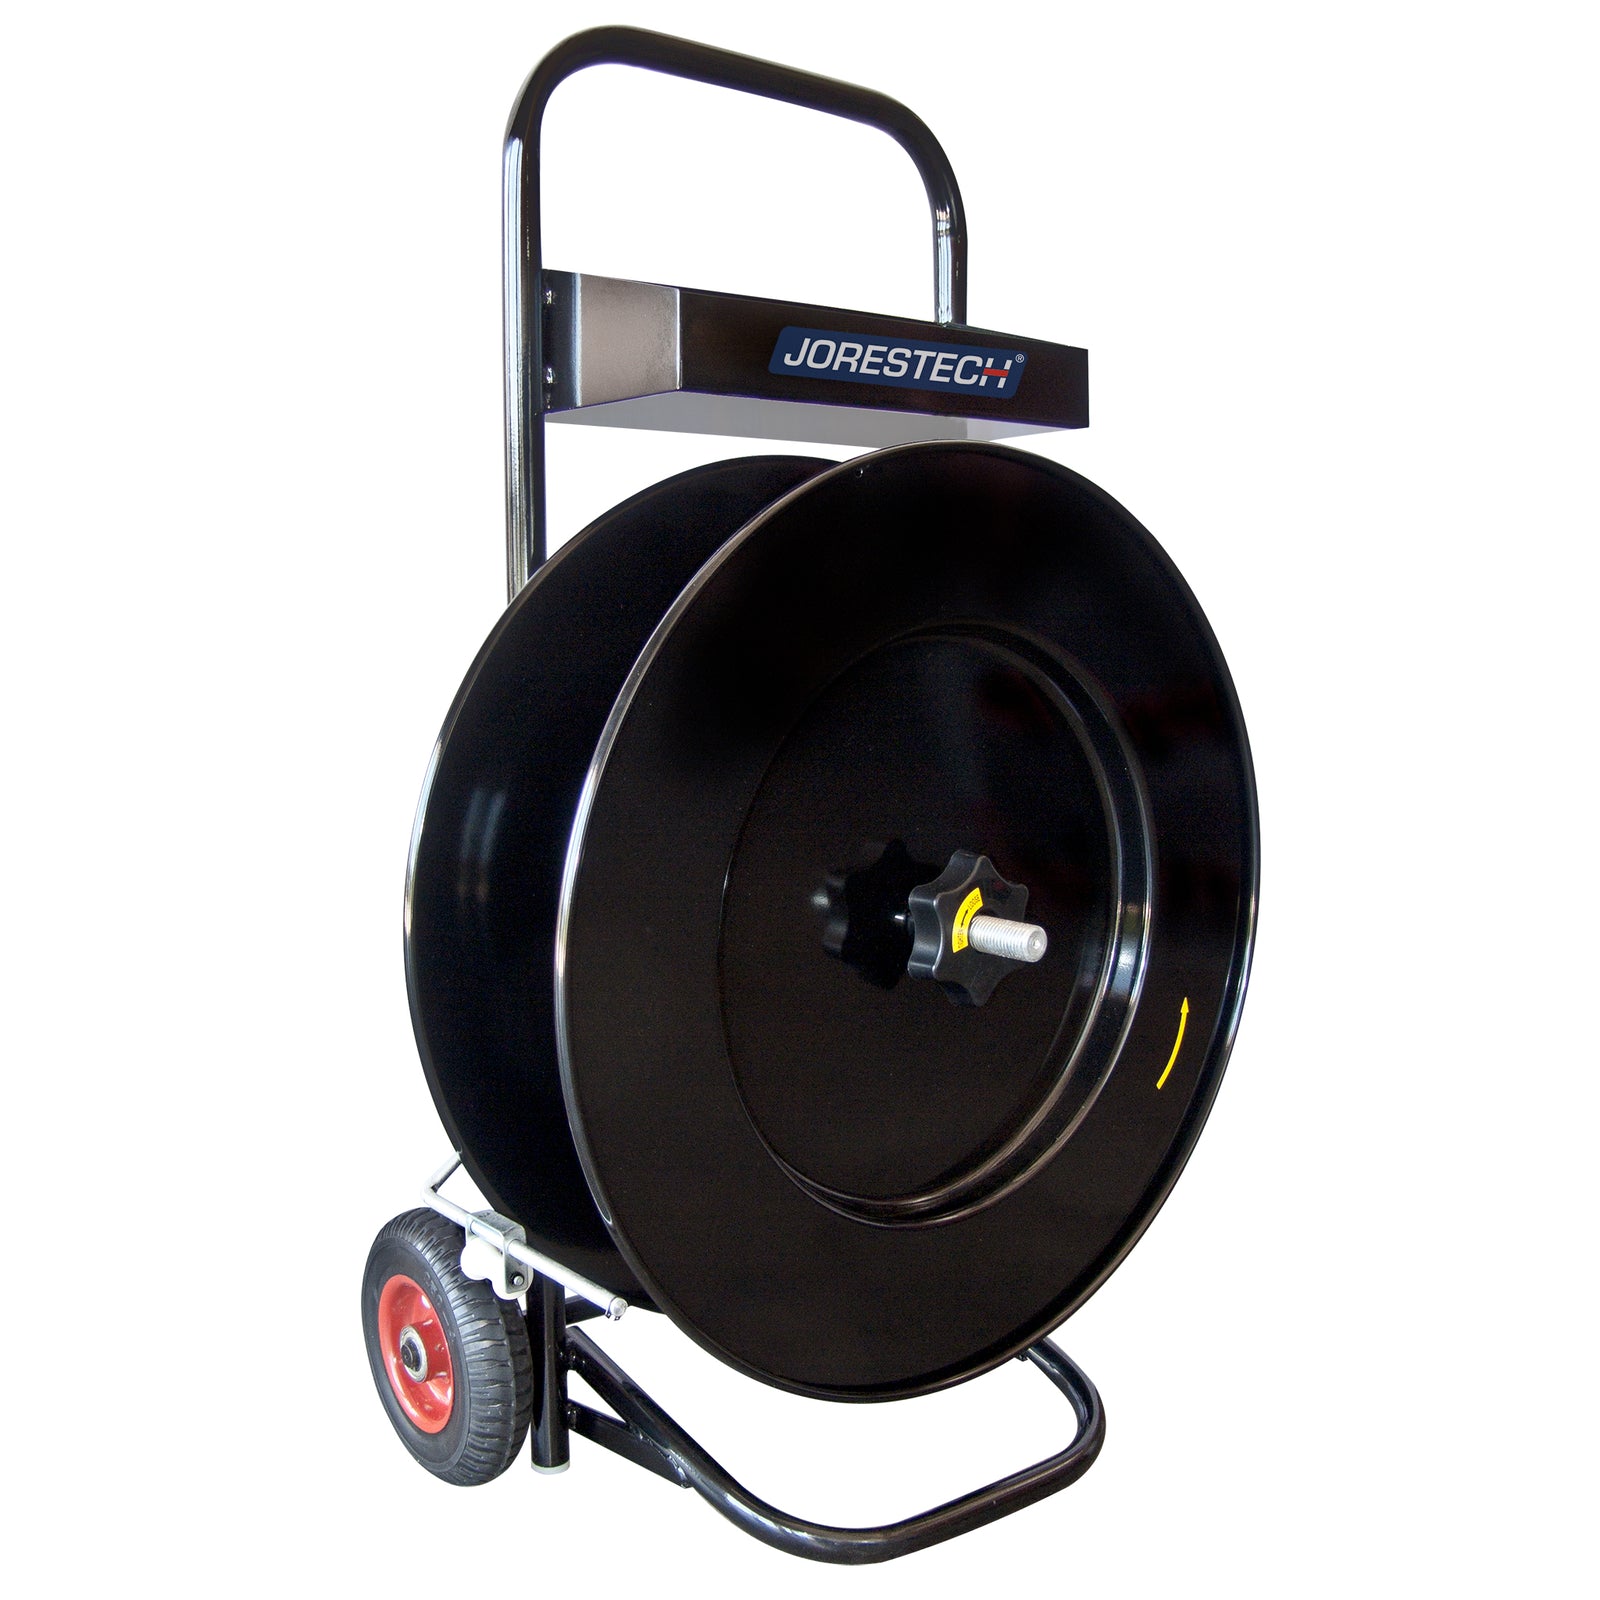 Diagonal view of a black Jorestech Manual Pallet Poly Strapping Metal Cart with 16x16 inch core dispenser and wheels